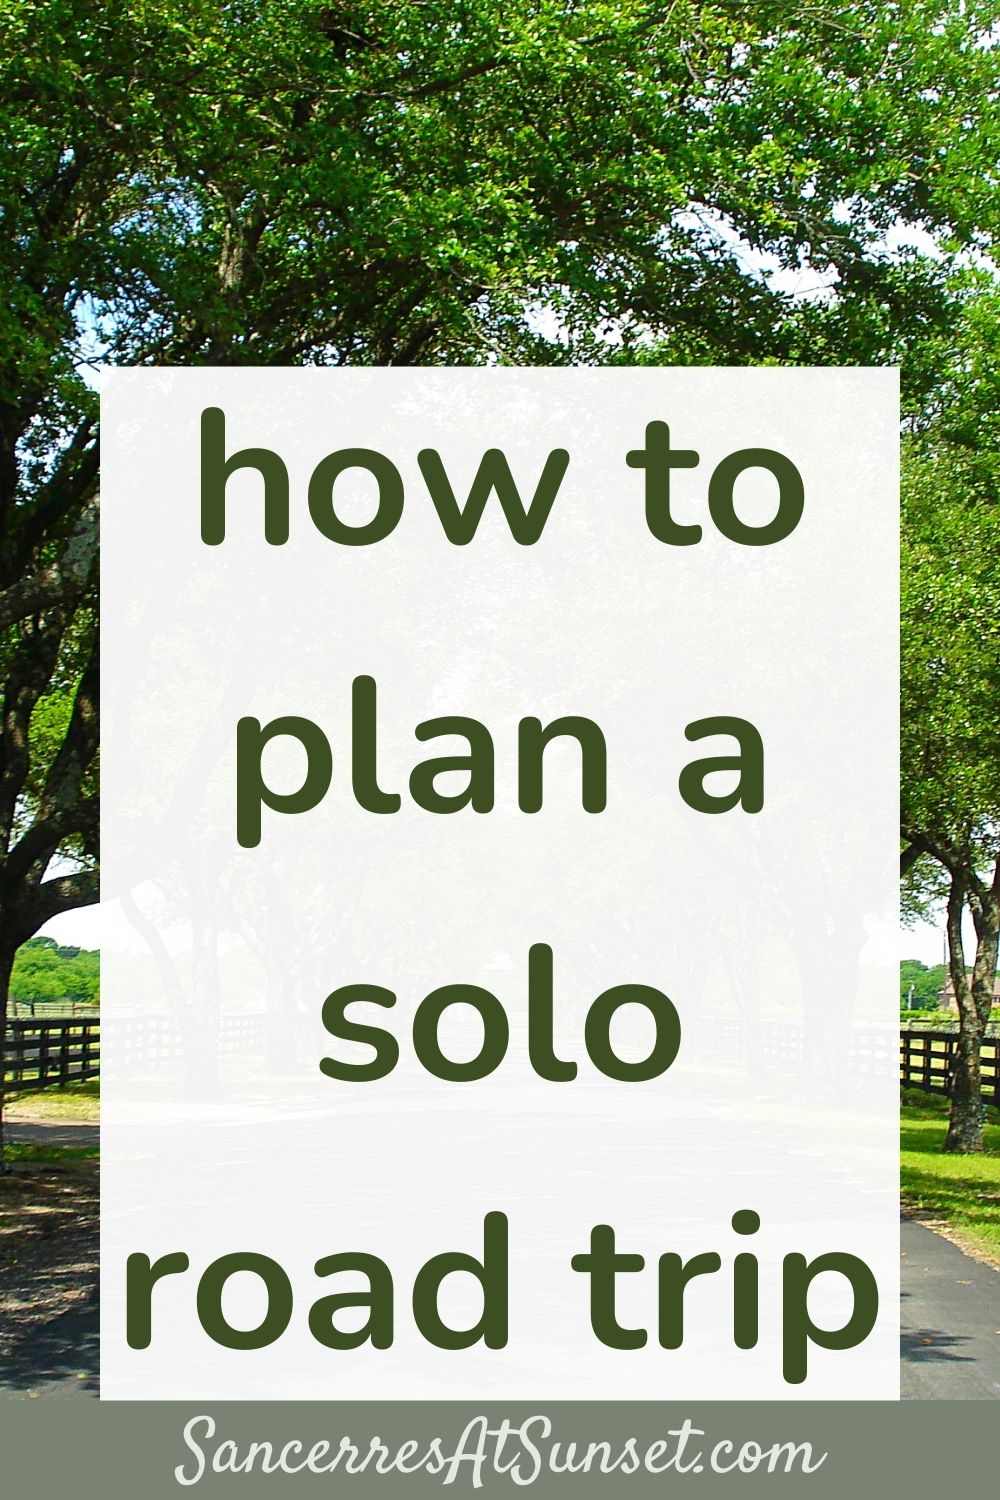 How to Plan a Solo Road Trip